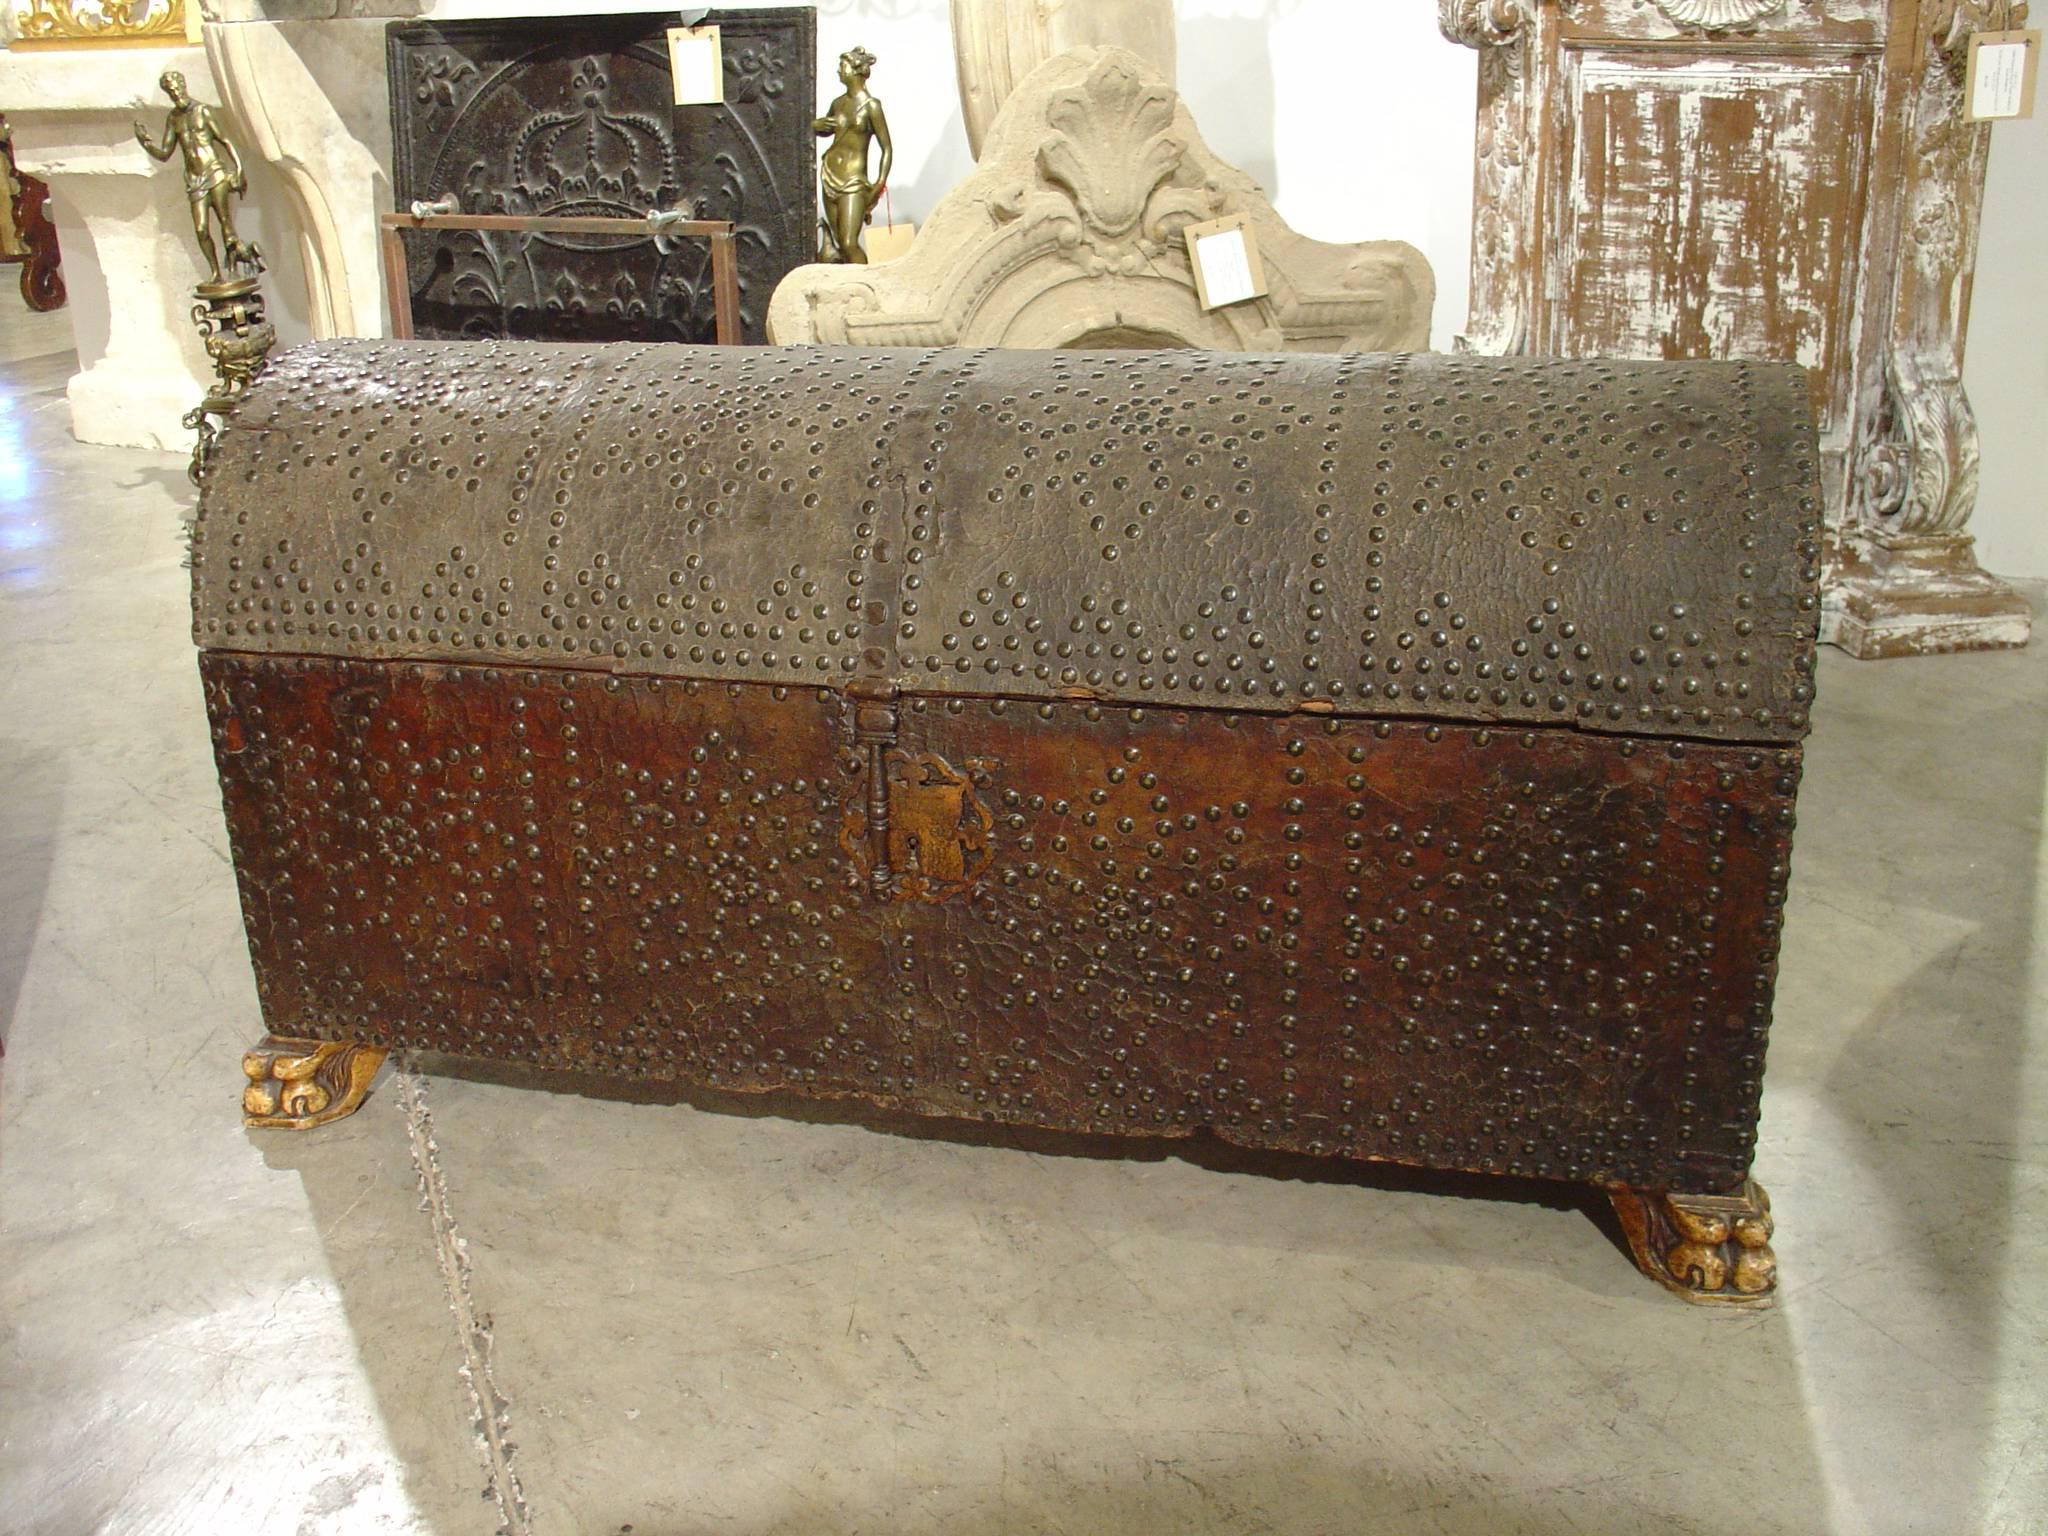 Spanish 17th Century Rounded Top Leather Trunk from Spain